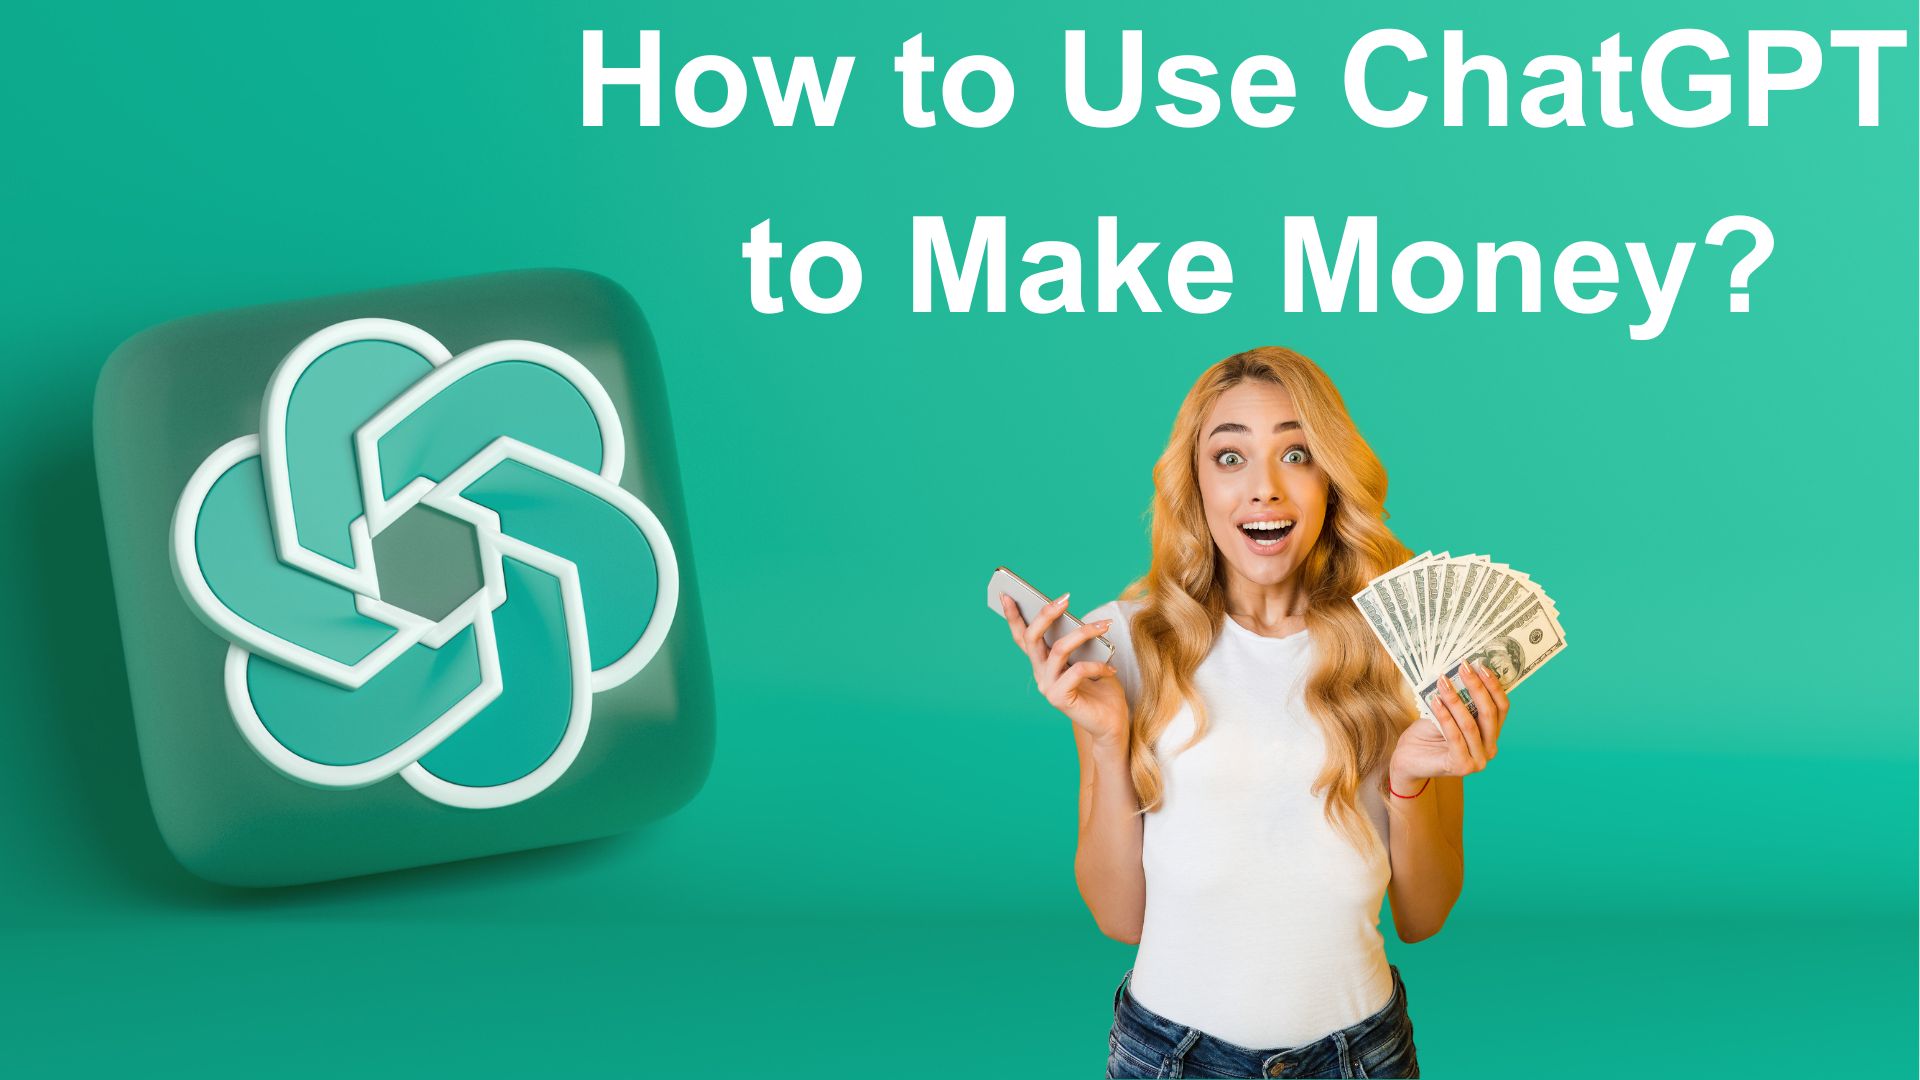 How to Use ChatGPT to Make Money (15 Easy Ways)